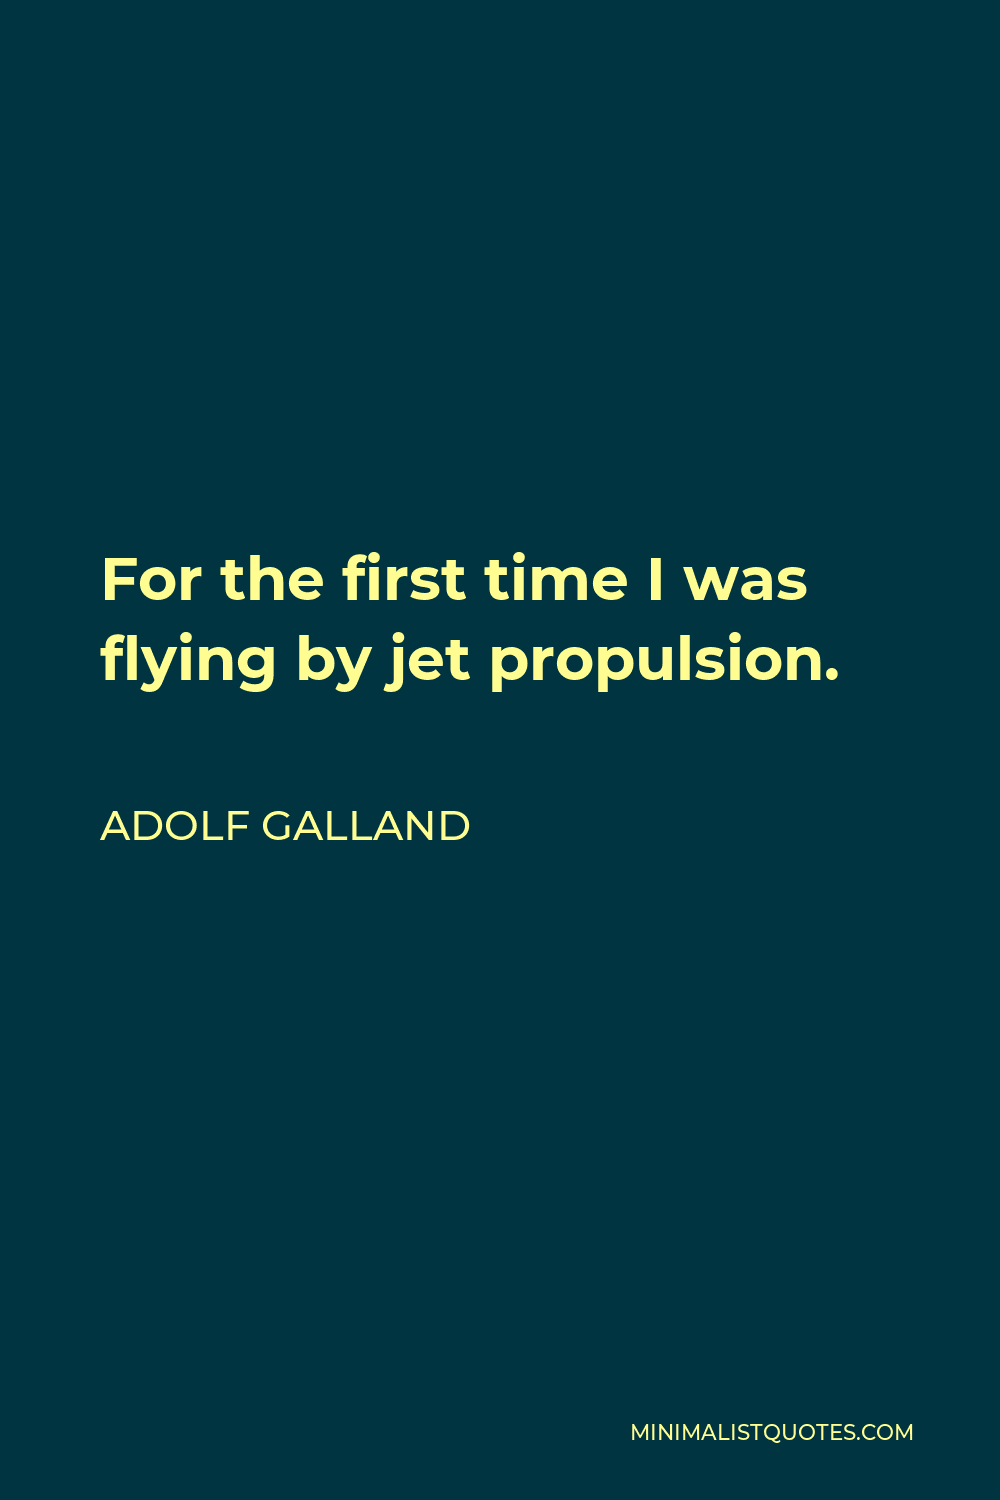 Adolf Galland Quote - For the first time I was flying by jet propulsion.